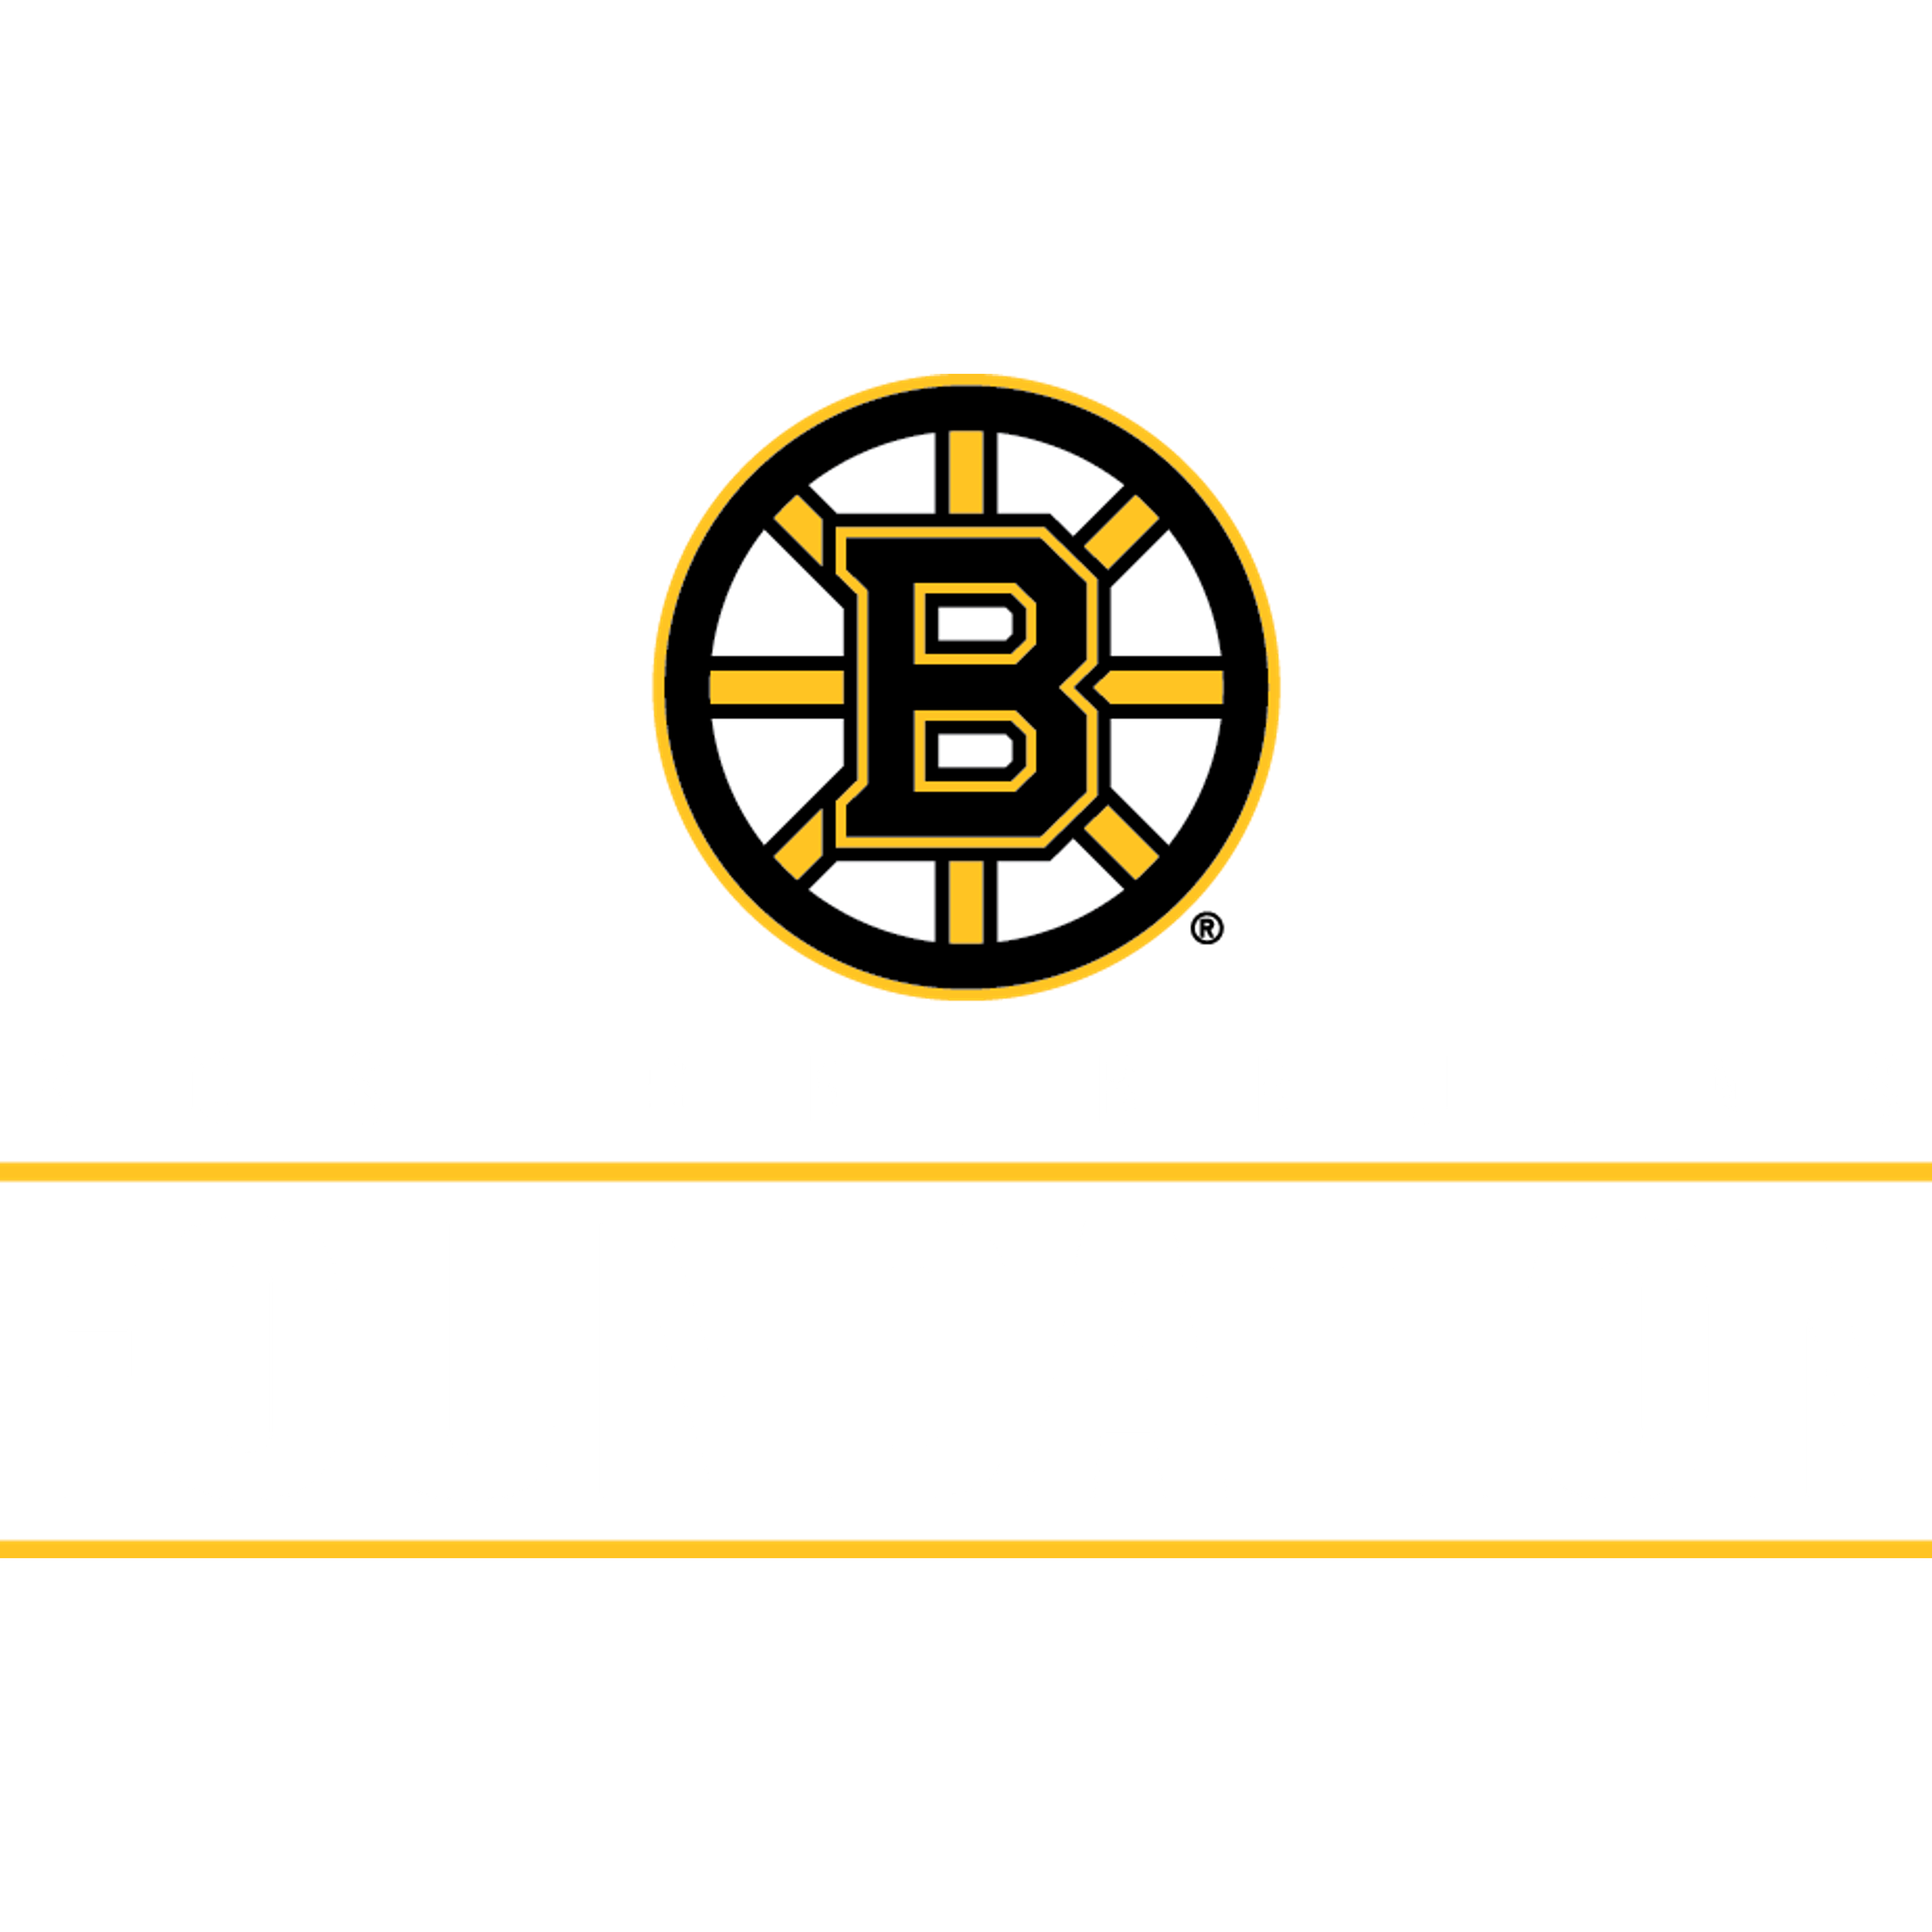 4 Suite Tickets & 1 Parking Pass for March 16th Bruins vs. Flyers Game logo image